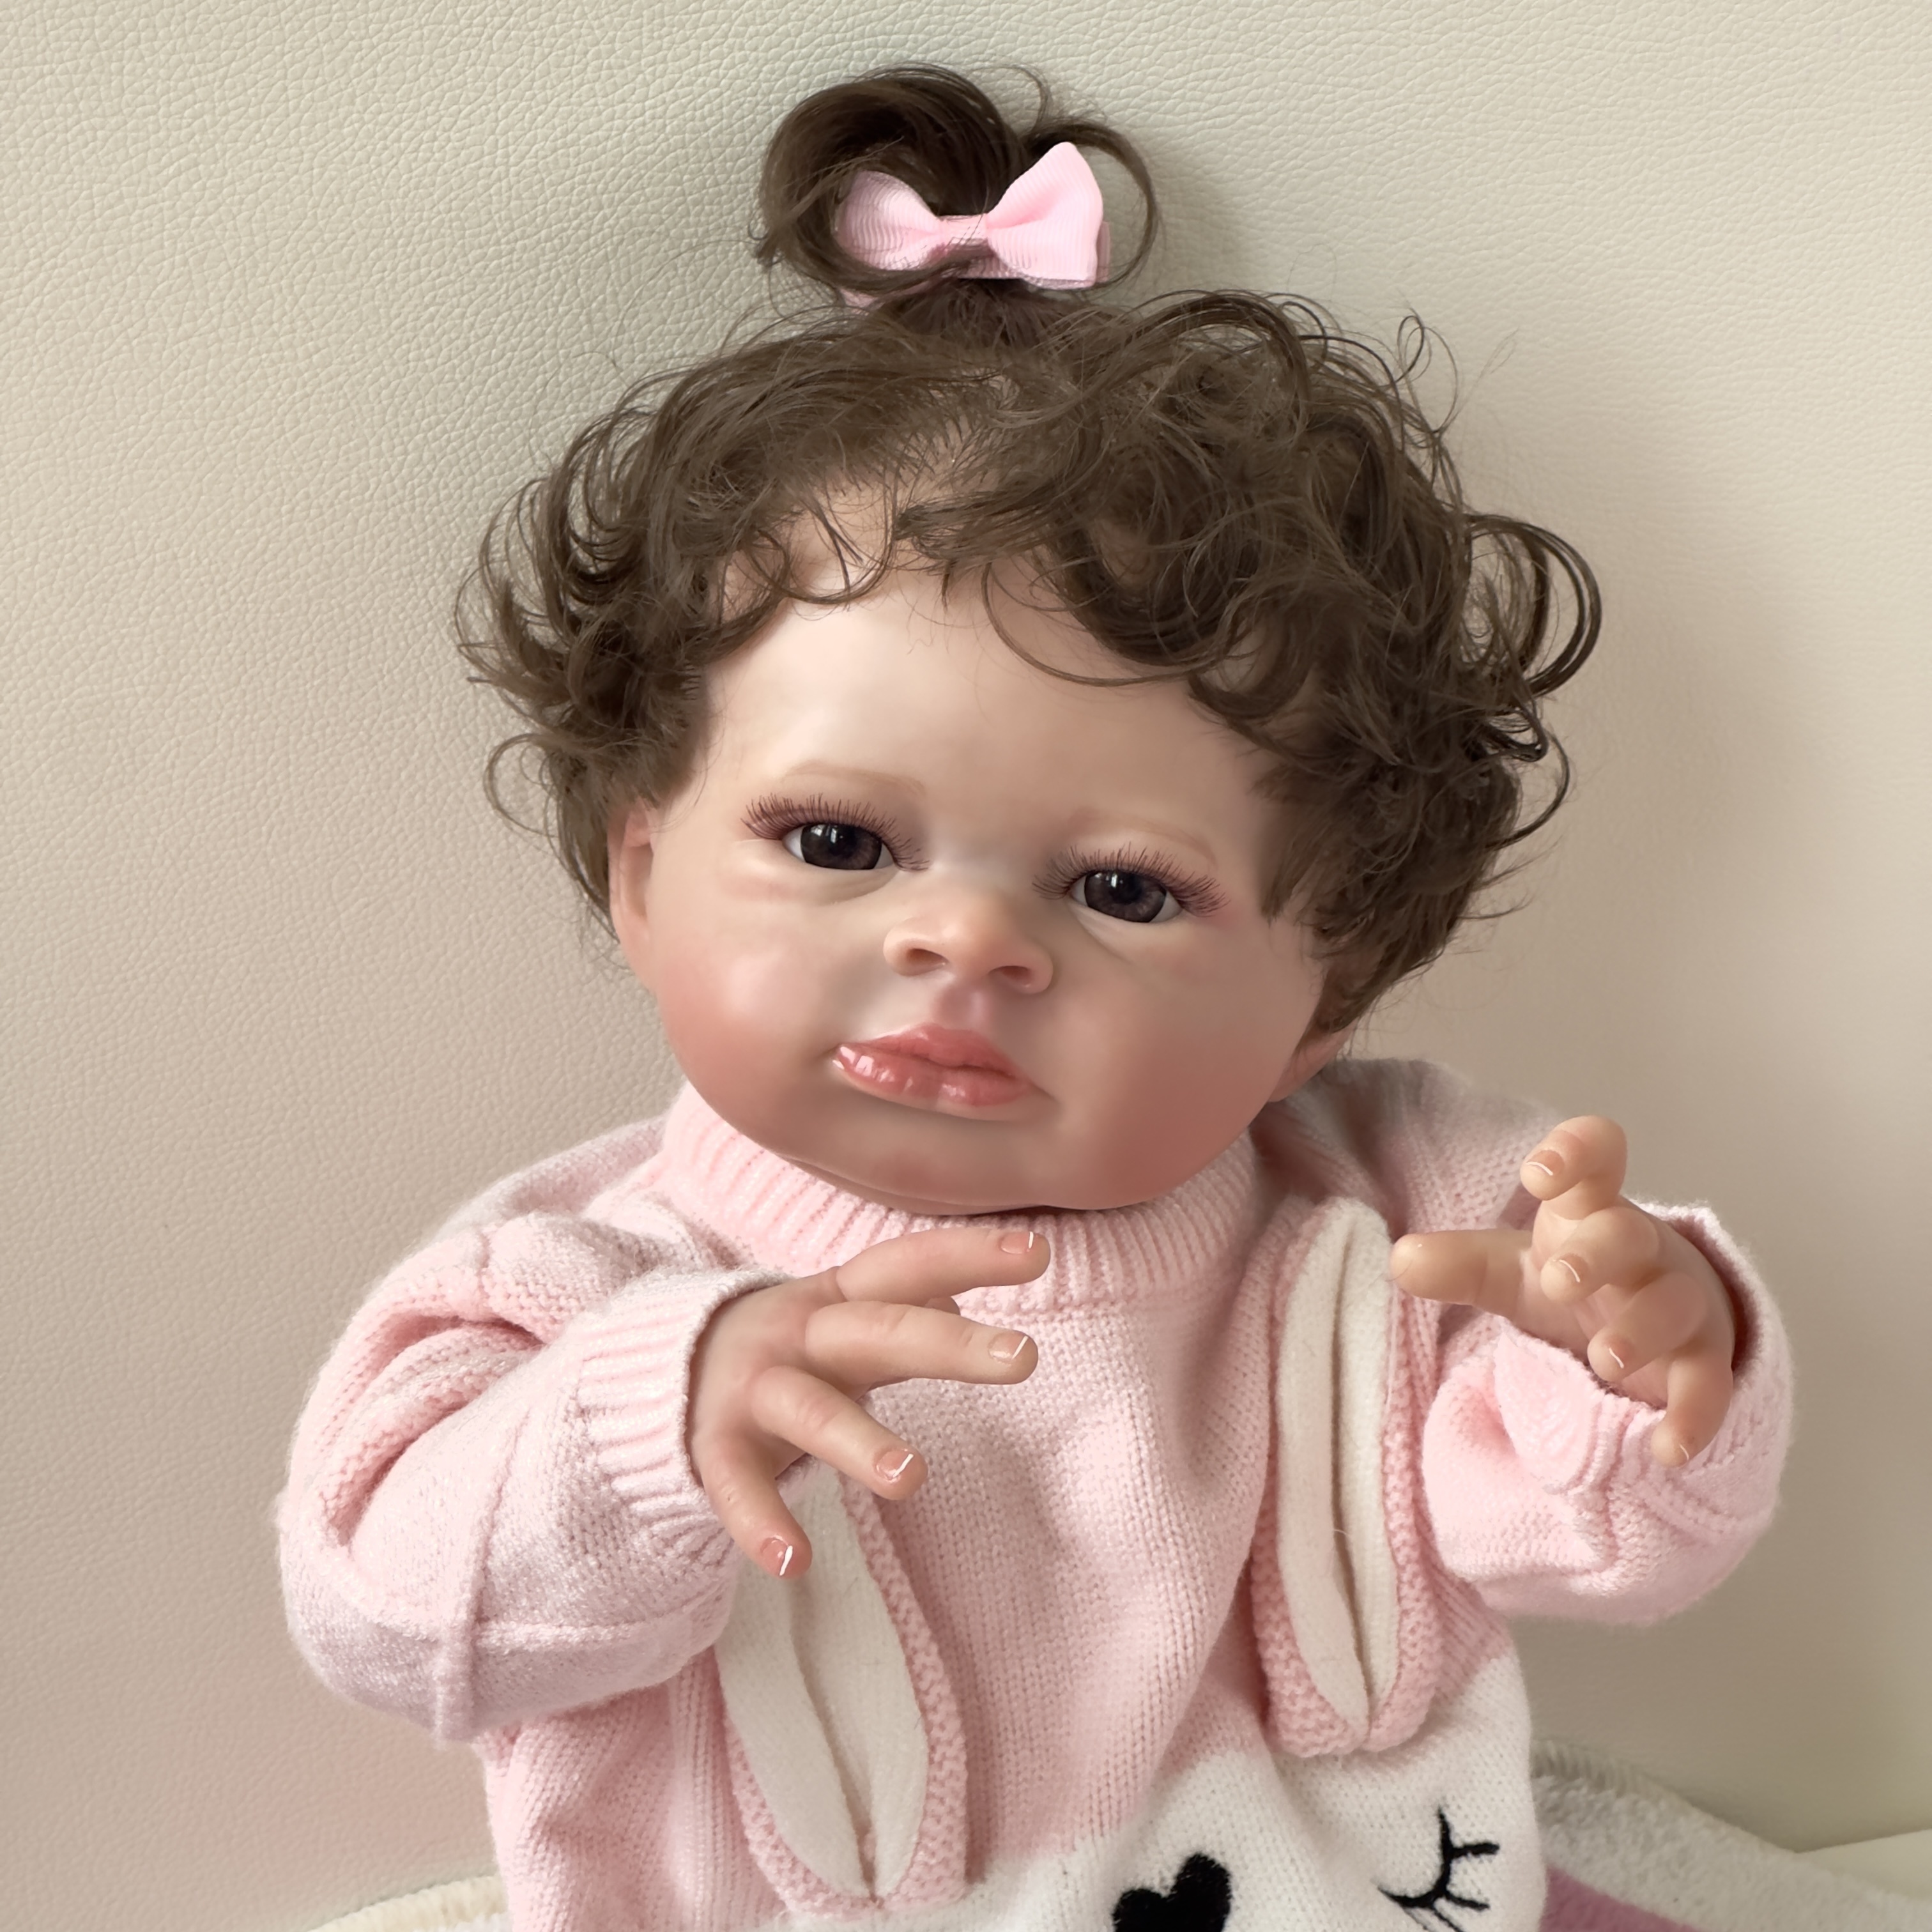 19 inch 48cm Reborn Baby Dolls Realistic Baby Doll with Soft Cotton Body  That Look Real Lifelike Preemie Baby Dolls Soft Baby Toys for Kids